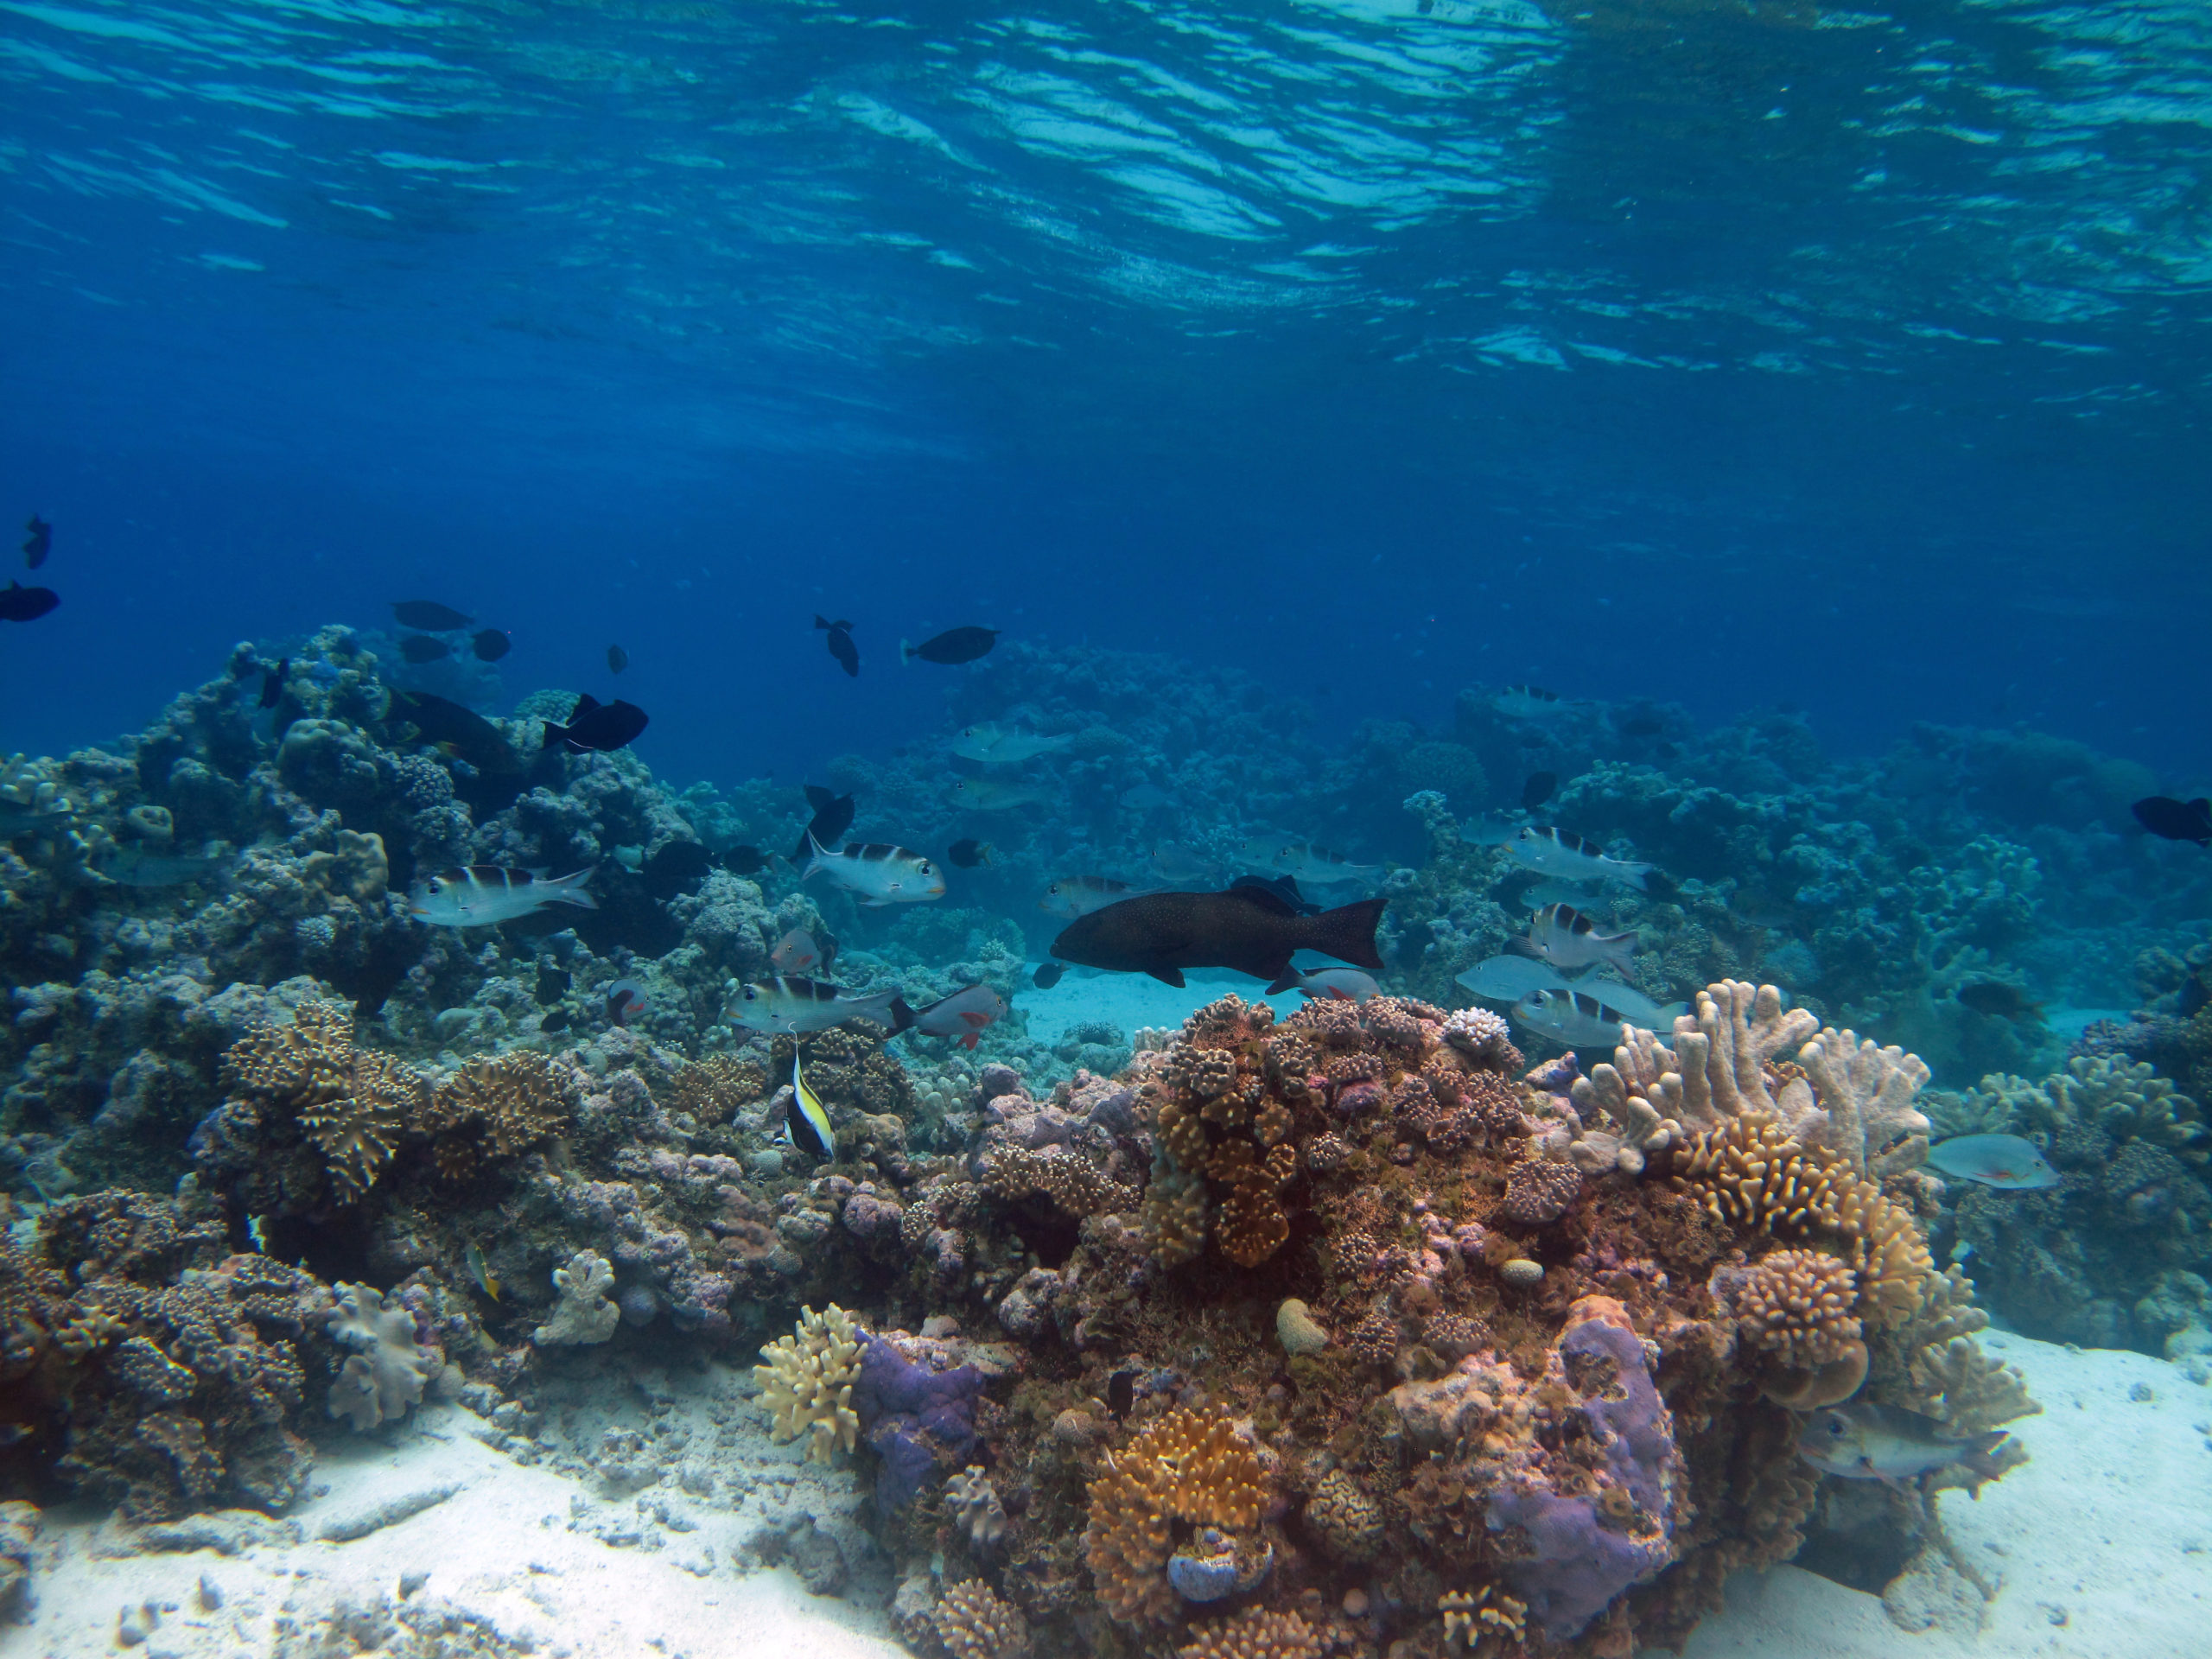 Underwater shot showing coral reef with fish swimming through it